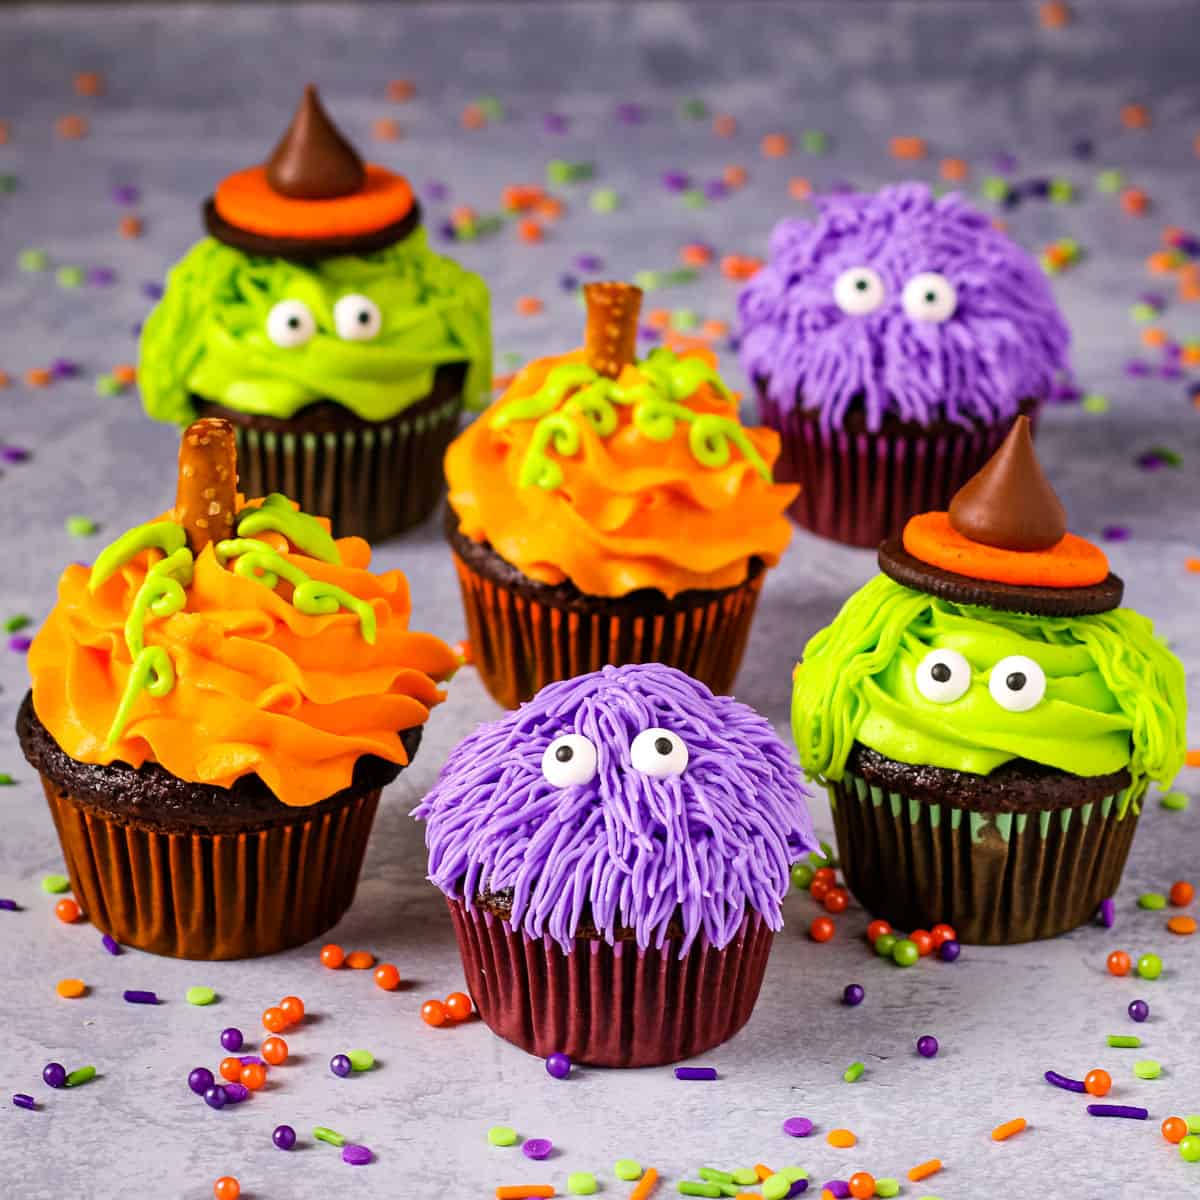 Cute Halloween cupcakes decorated as purple monsters, green witches, and orange pumpkins.